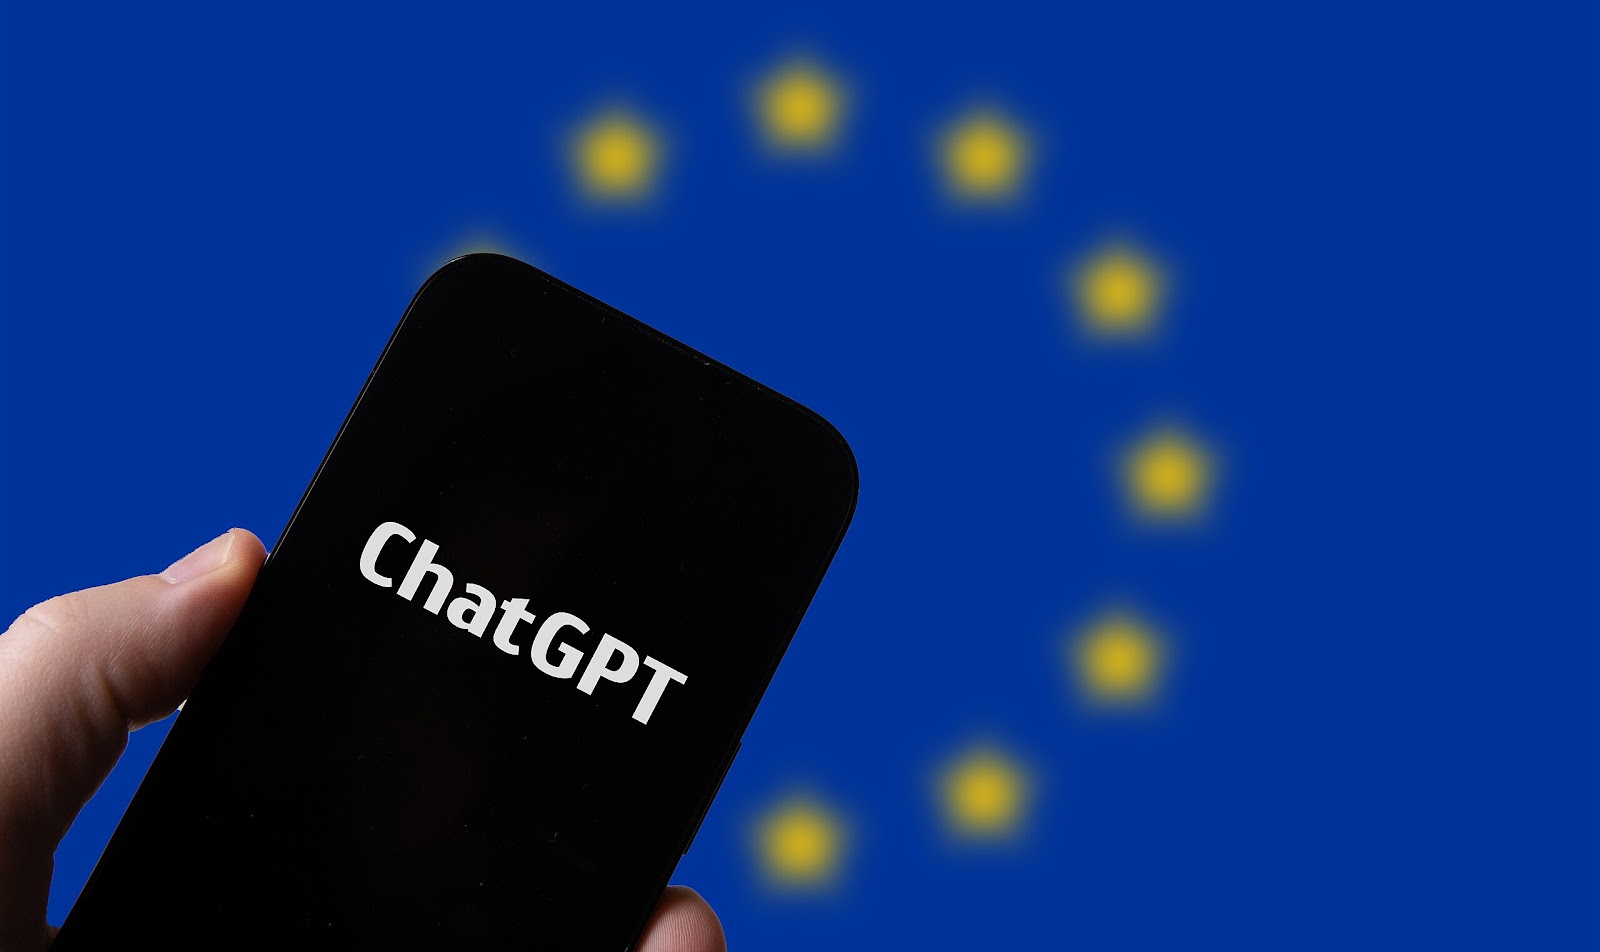 https://upload.wikimedia.org/wikipedia/commons/thumb/a/af/Hand_holding_smartphone_with_OpenAI_Chat_GPT_against_flag_of_EU_%2852917311860%29.jpg/2560px-Hand_holding_smartphone_with_OpenAI_Chat_GPT_against_flag_of_EU_%2852917311860%29.jpg